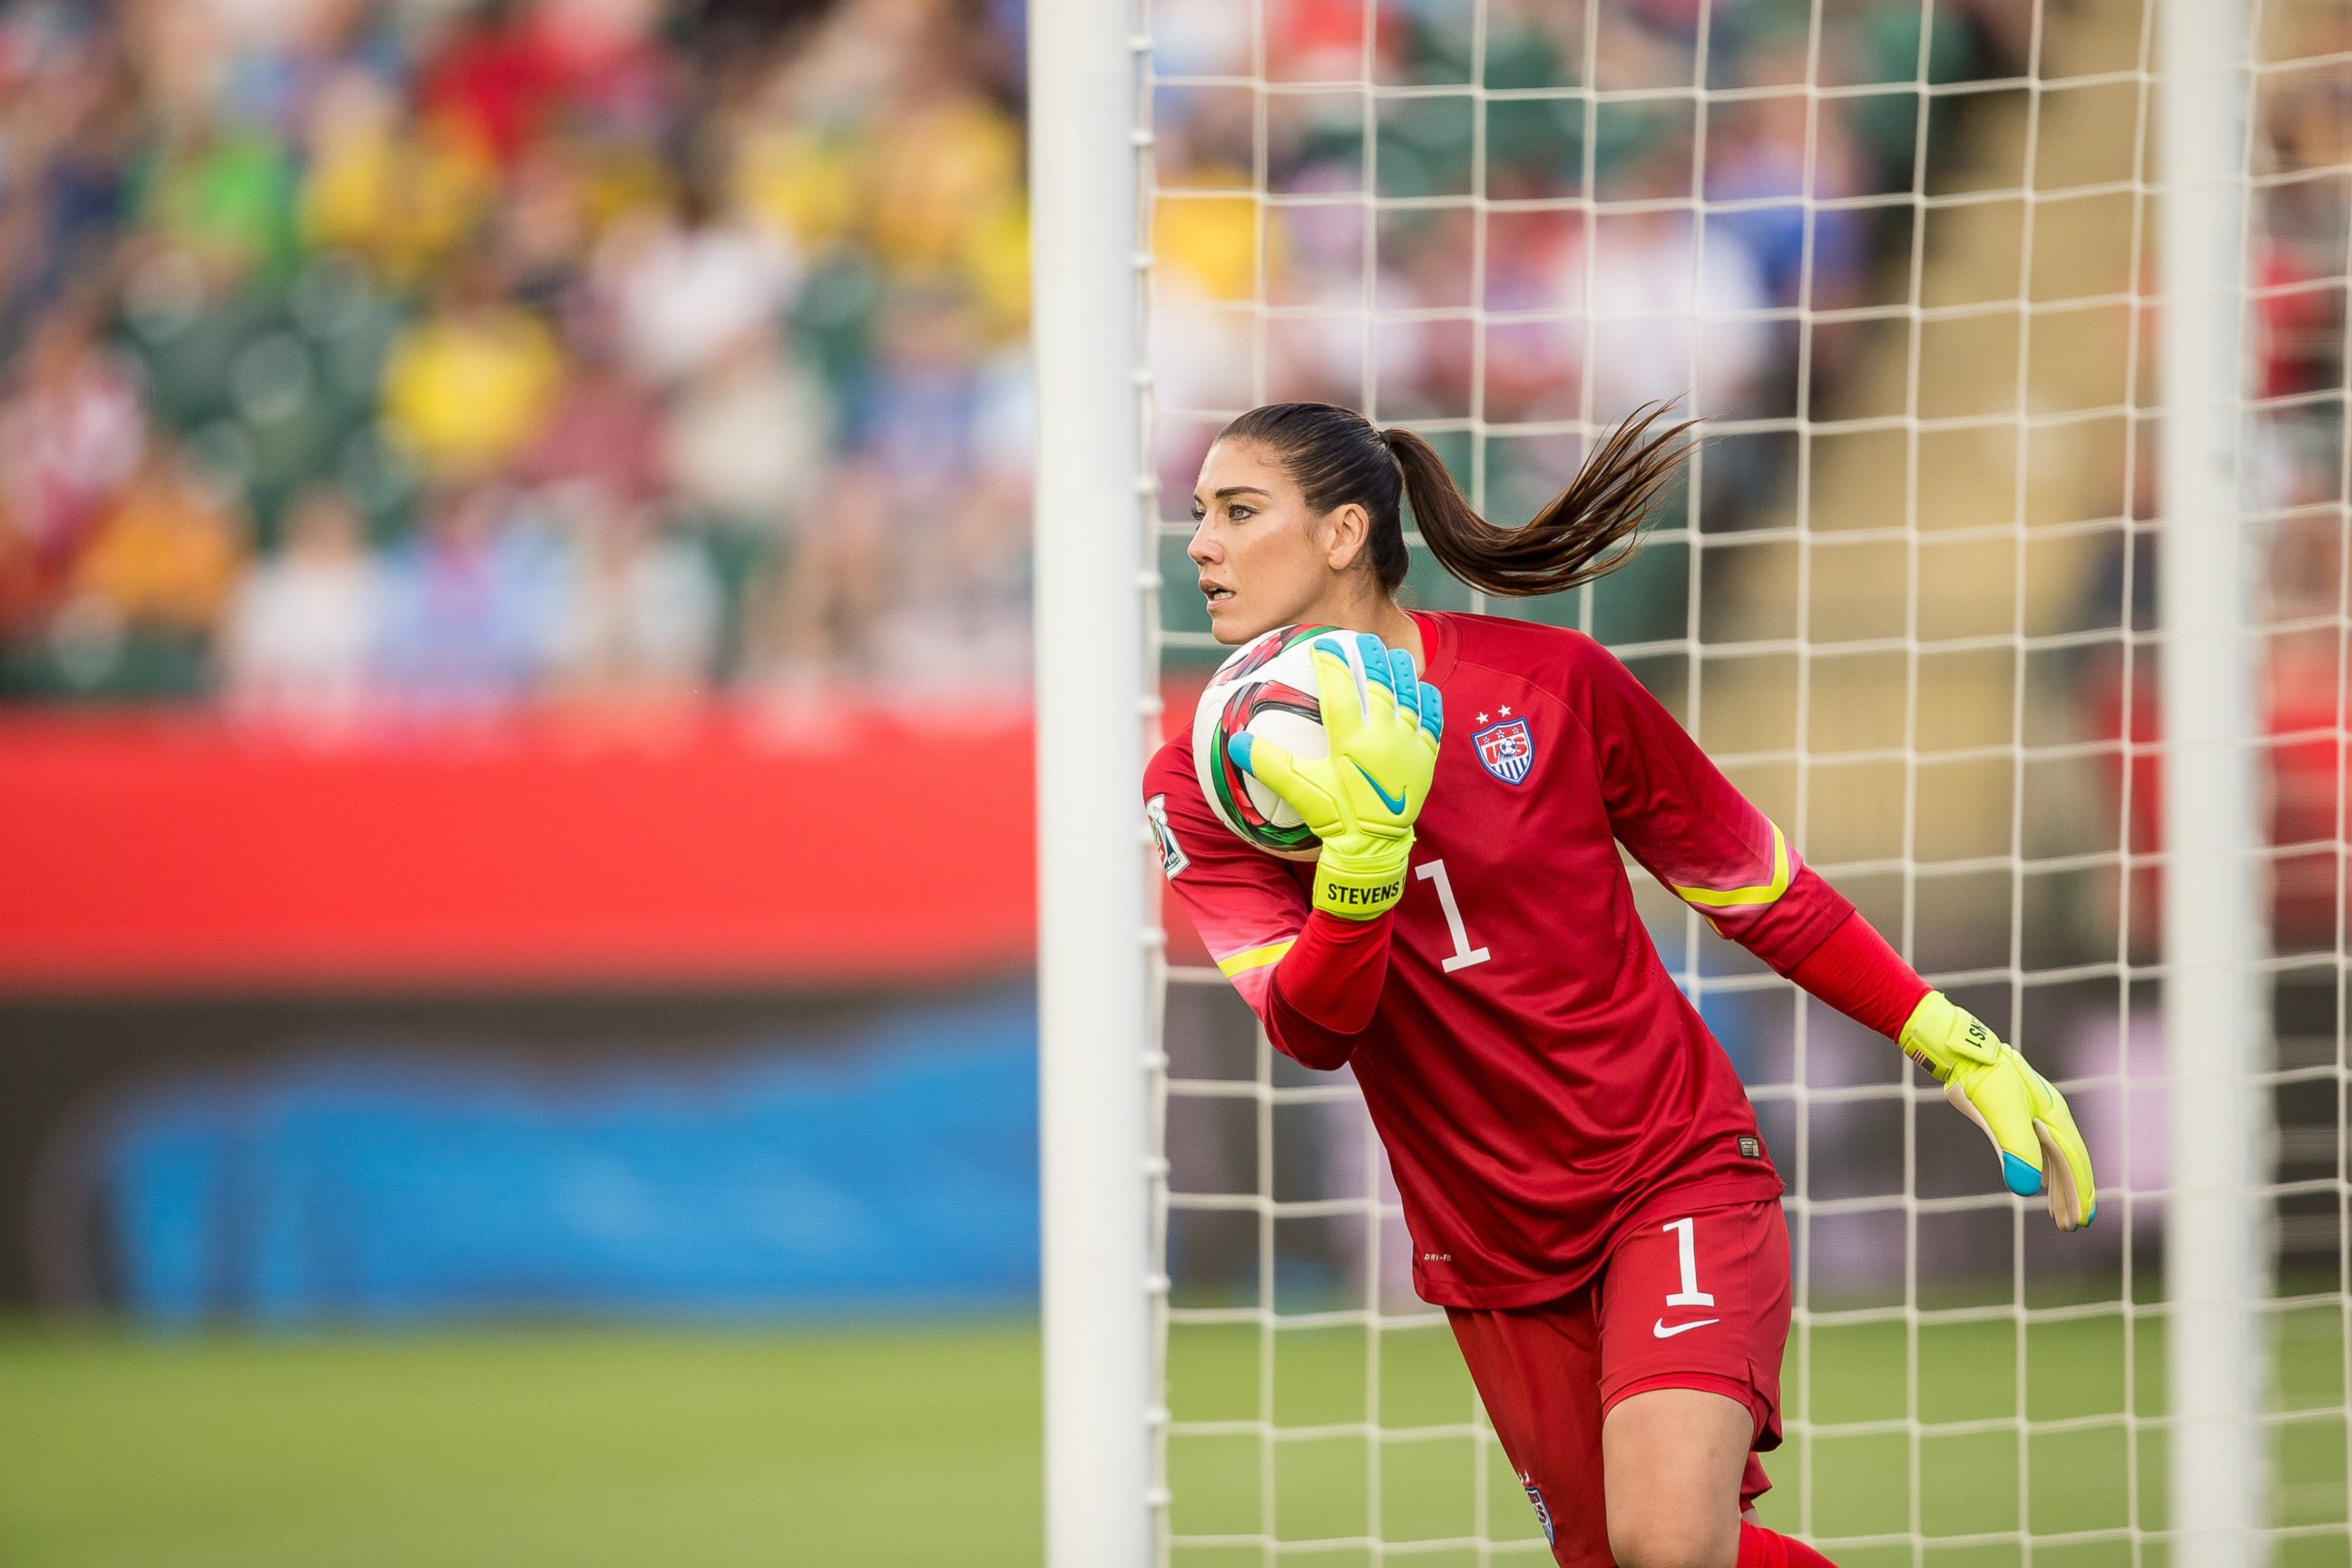 PHOTO: USA goalkeeper Hope Solo makes a save during the United States' 2-0 win over Colombia in their FIFA Women's World Cup Group of 16 Match at Commonwealth Stadium in Edmonton, Canada on June 22, 2015.